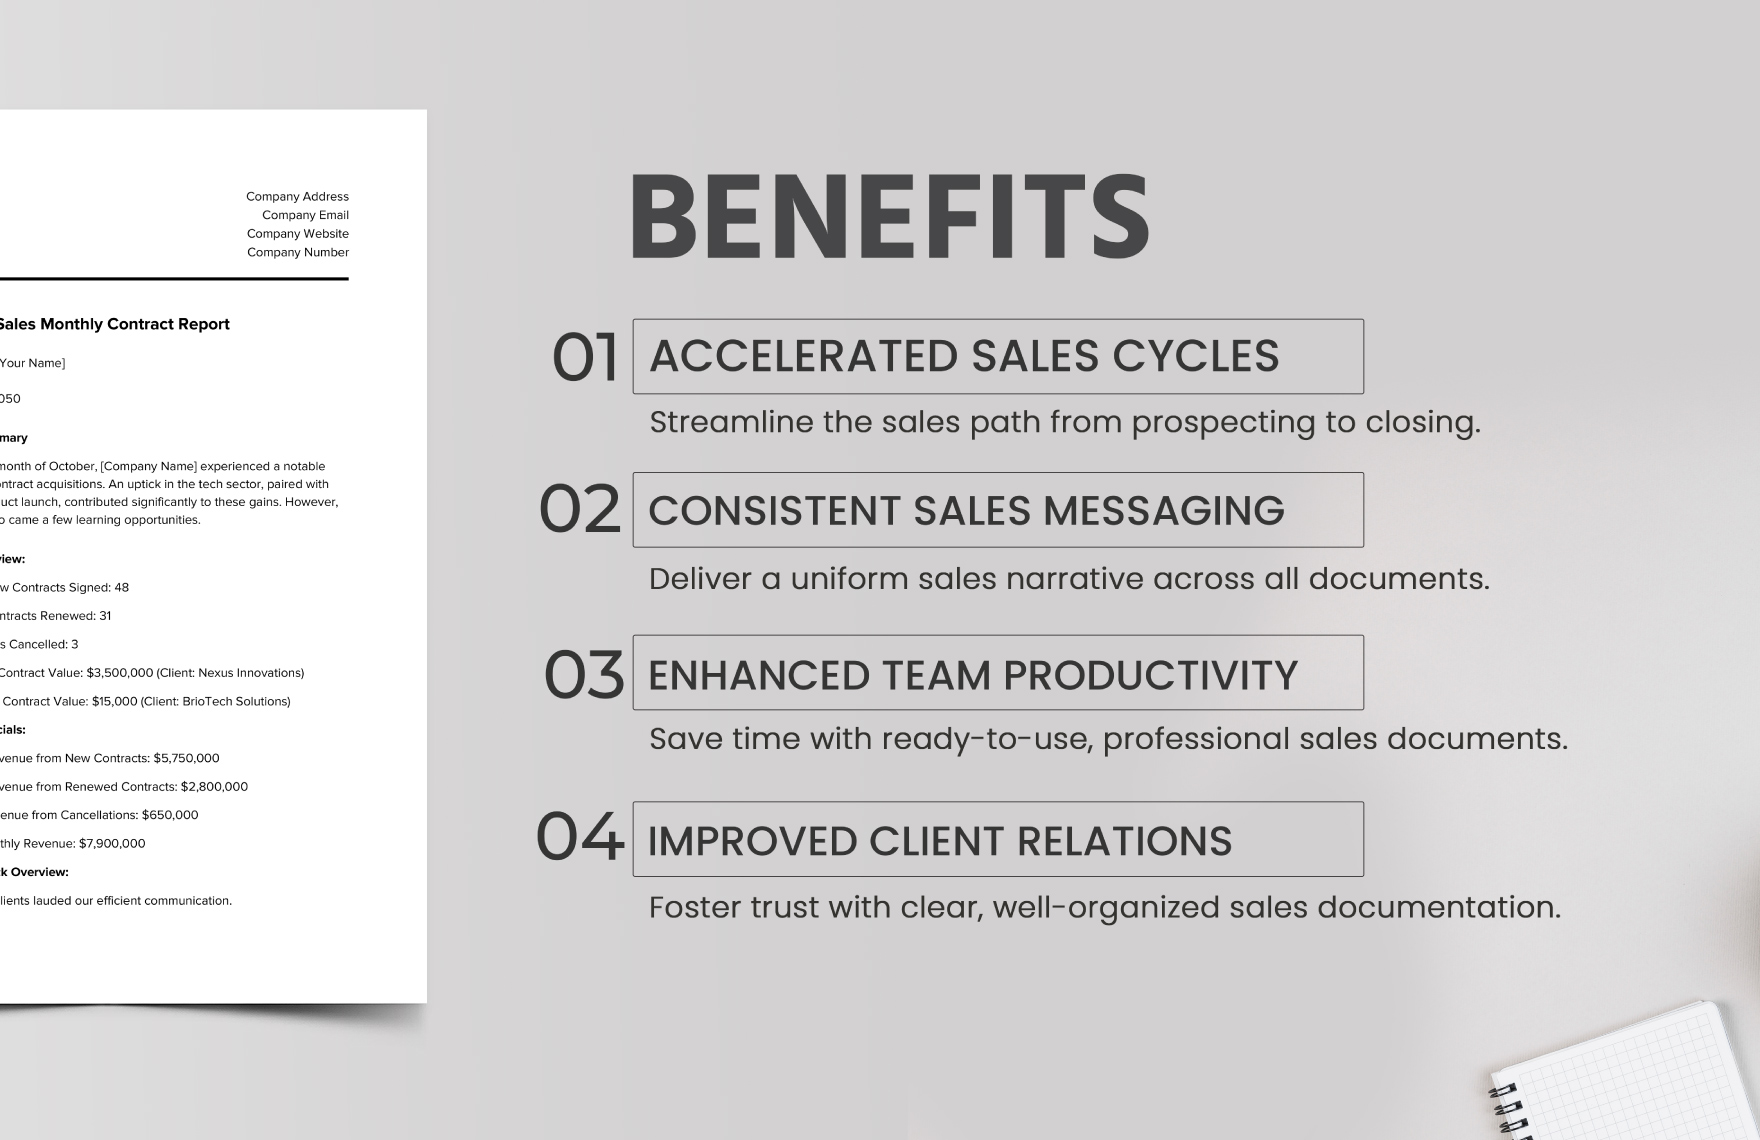 Sales Monthly Contract Report Template